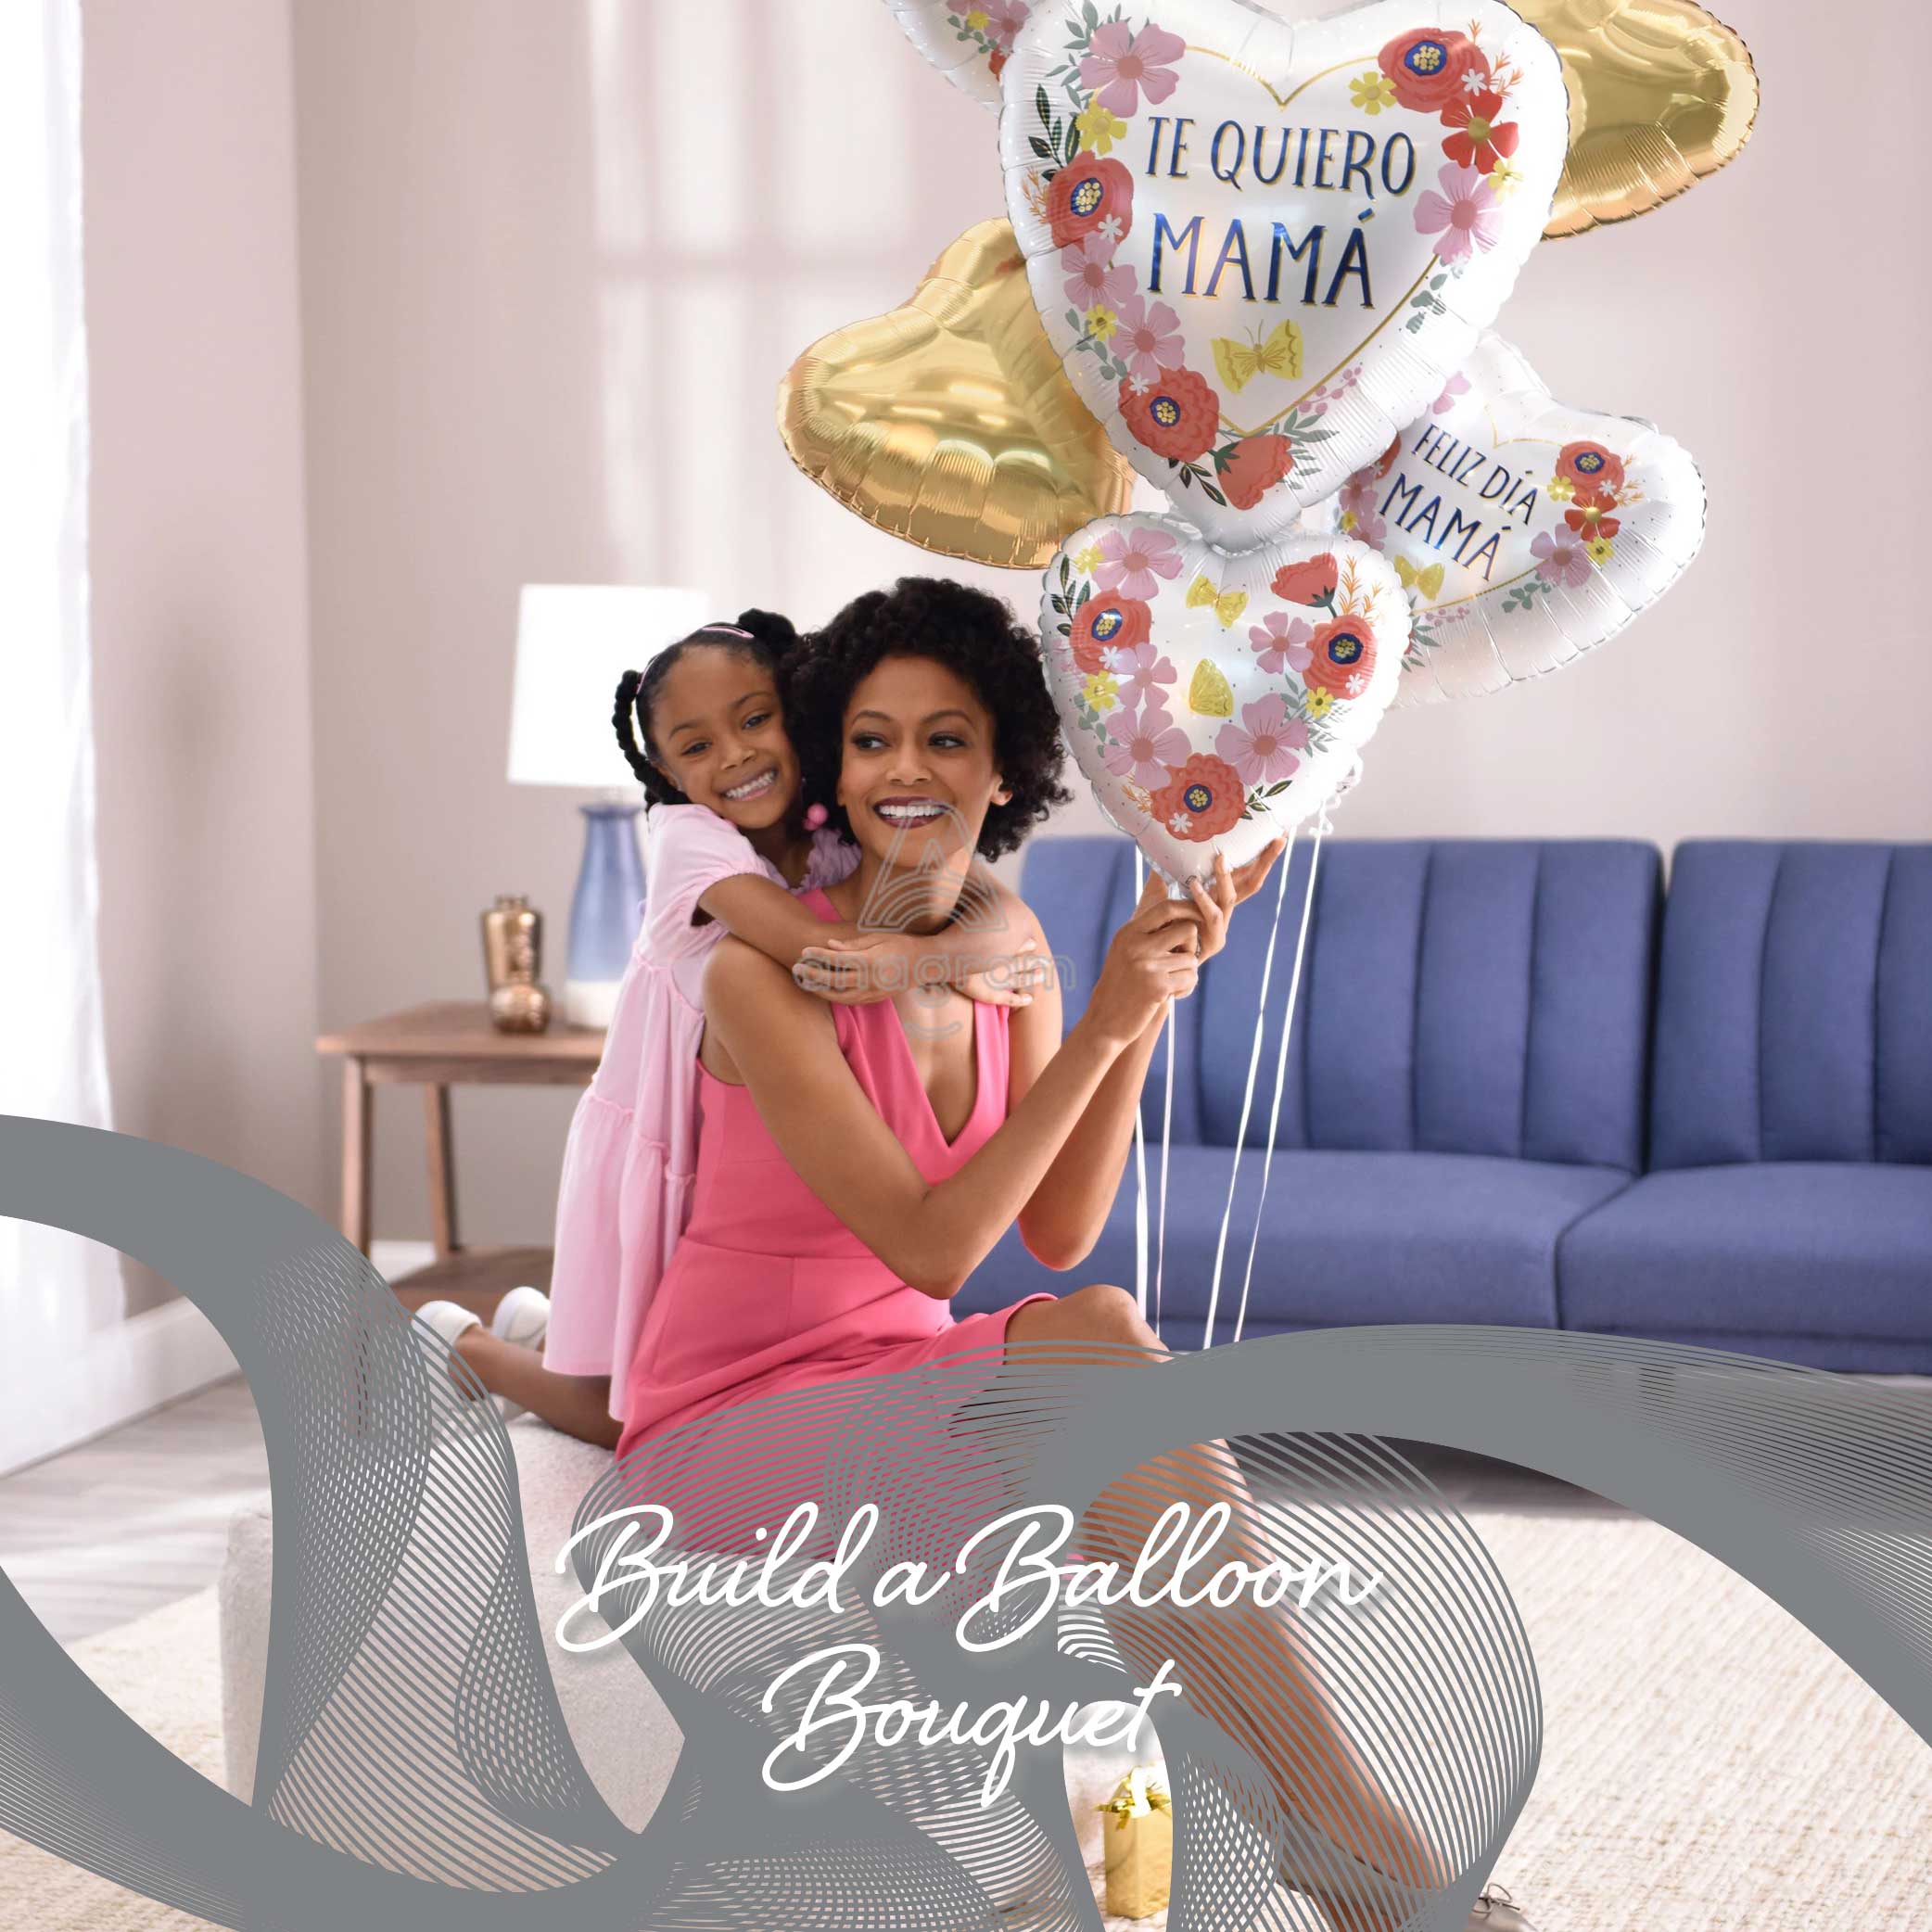 young girl and mother holding balloon bouquet